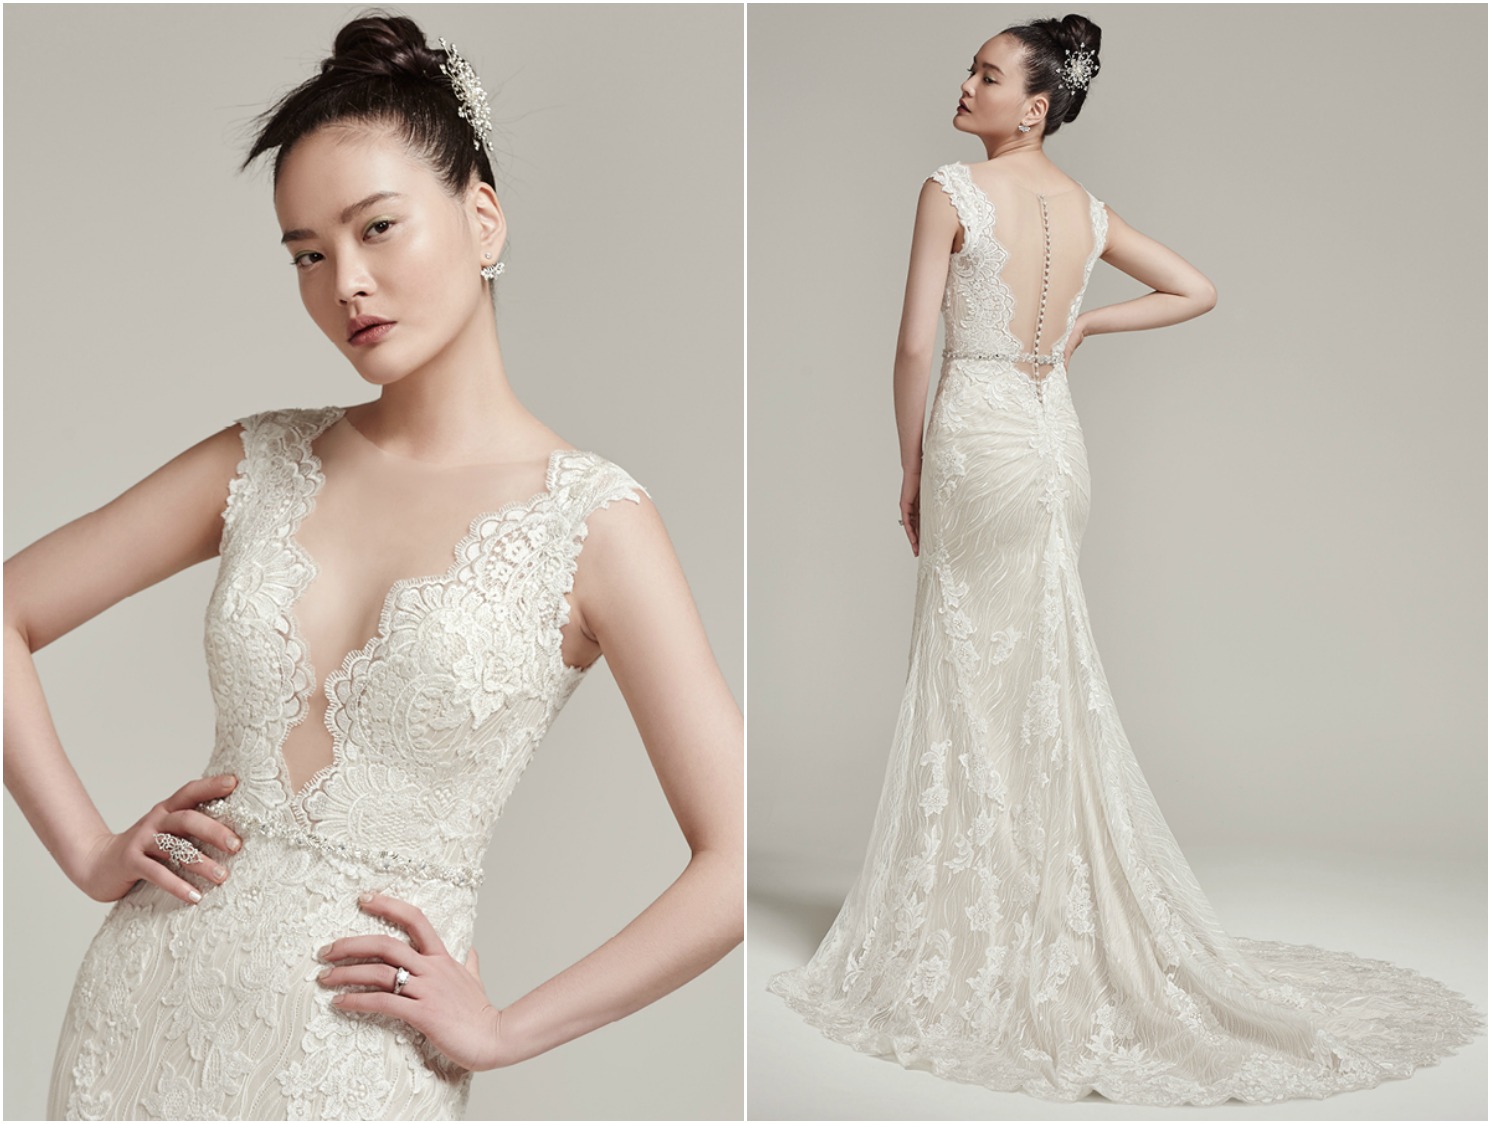 Sophisticated and effortlessly glamorous, this modern lace sheath wedding dress flaunts a sexy, plunging illusion neckline, beaded belt, and lace cap-sleeves. Complete with illusion back with ruched details. Finished with pearl buttons over zipper closure. 

<a href="https://www.maggiesottero.com/sottero-and-midgley/wyatt/9890" target="_blank">Sottero &amp; Midgley</a>